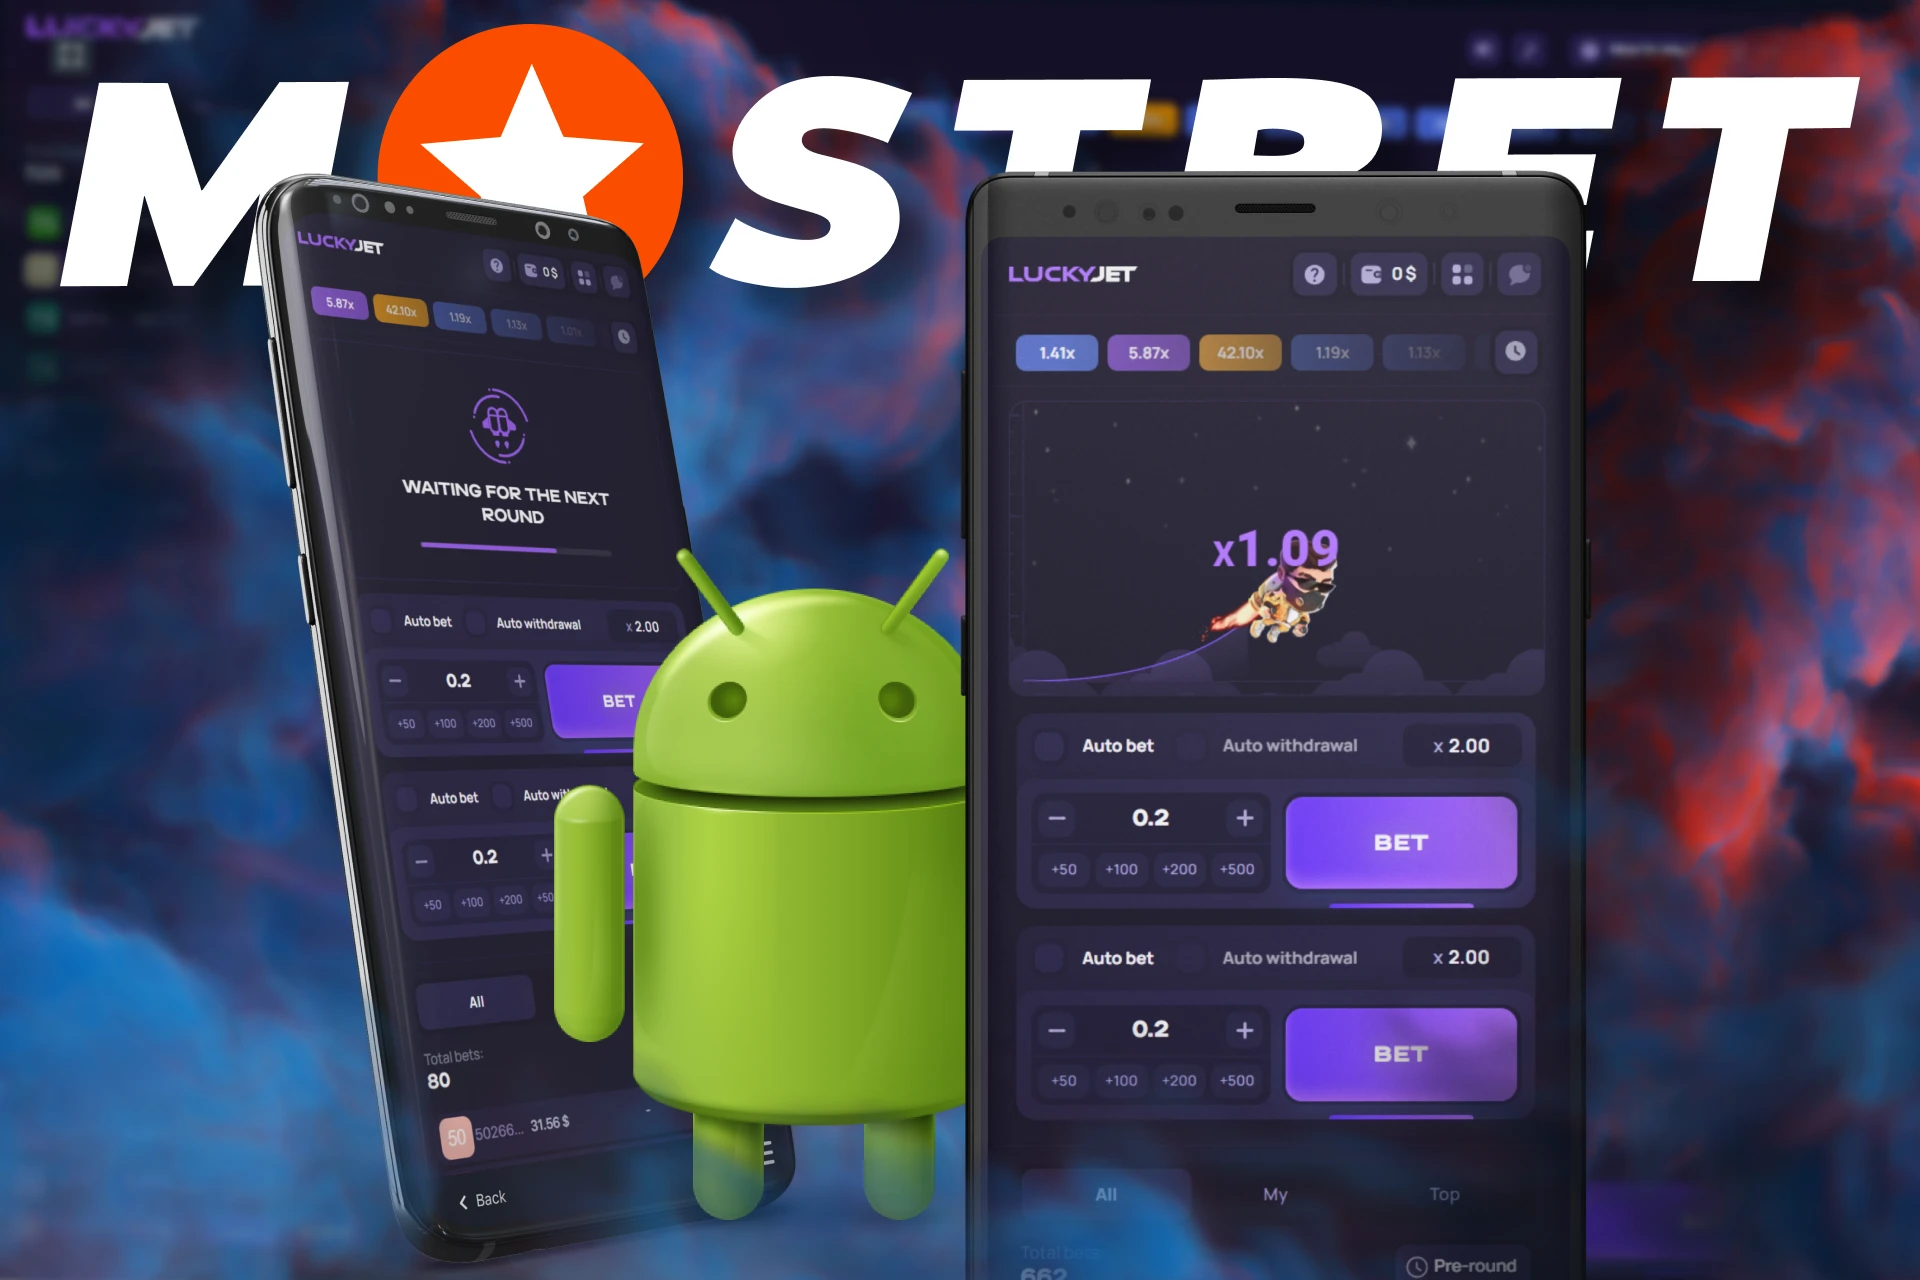 At Mostbet, play Lucky Jet on different Android devices.